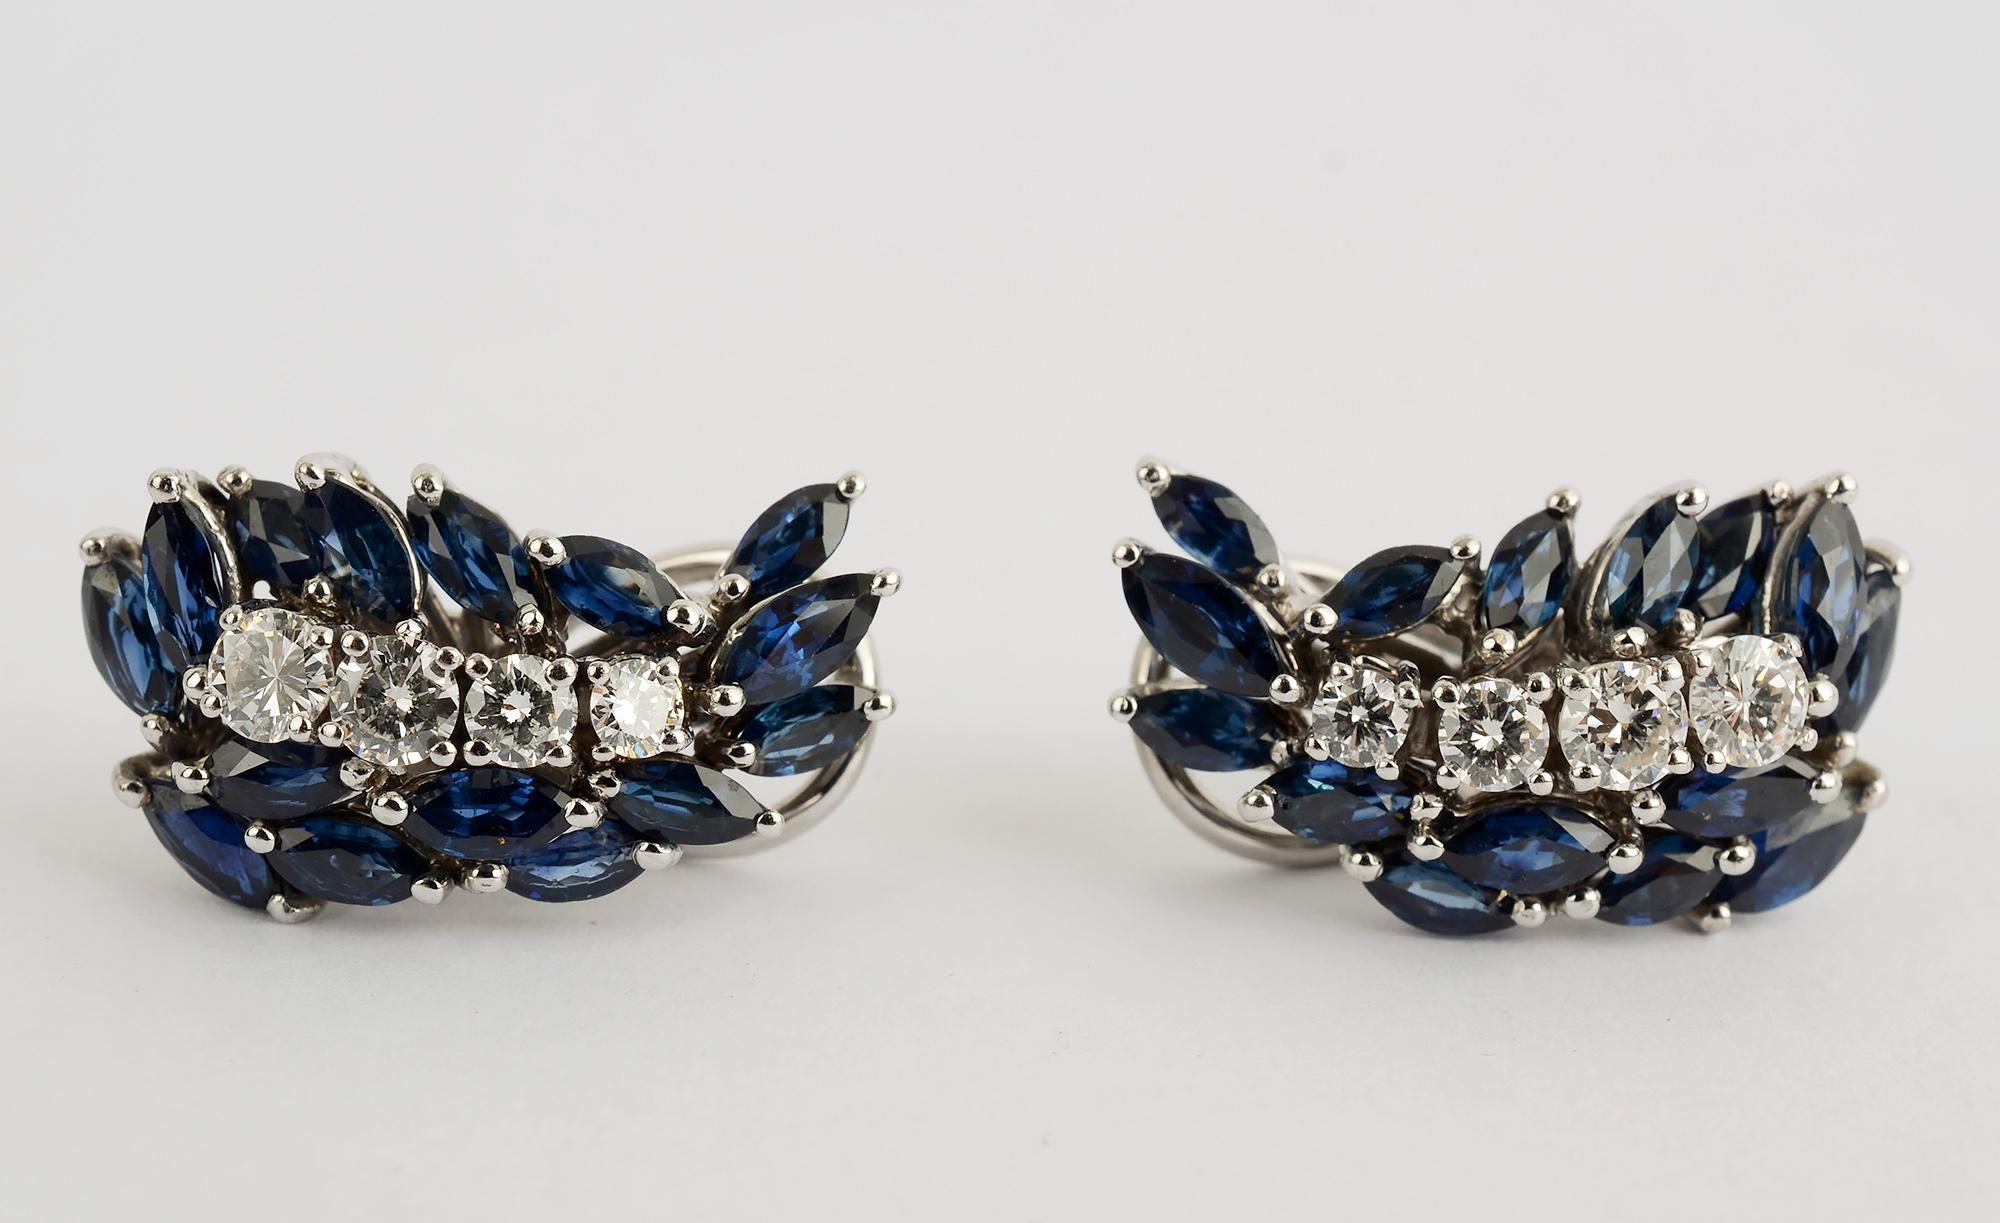 Elegant sapphire and diamond earrings set in 18 karat white gold. Each earring is centered with four diamonds of H color; VS quality and weighing approximately a total of half a carat. The sapphires are heat treated Ceylon stones.
The earrings have